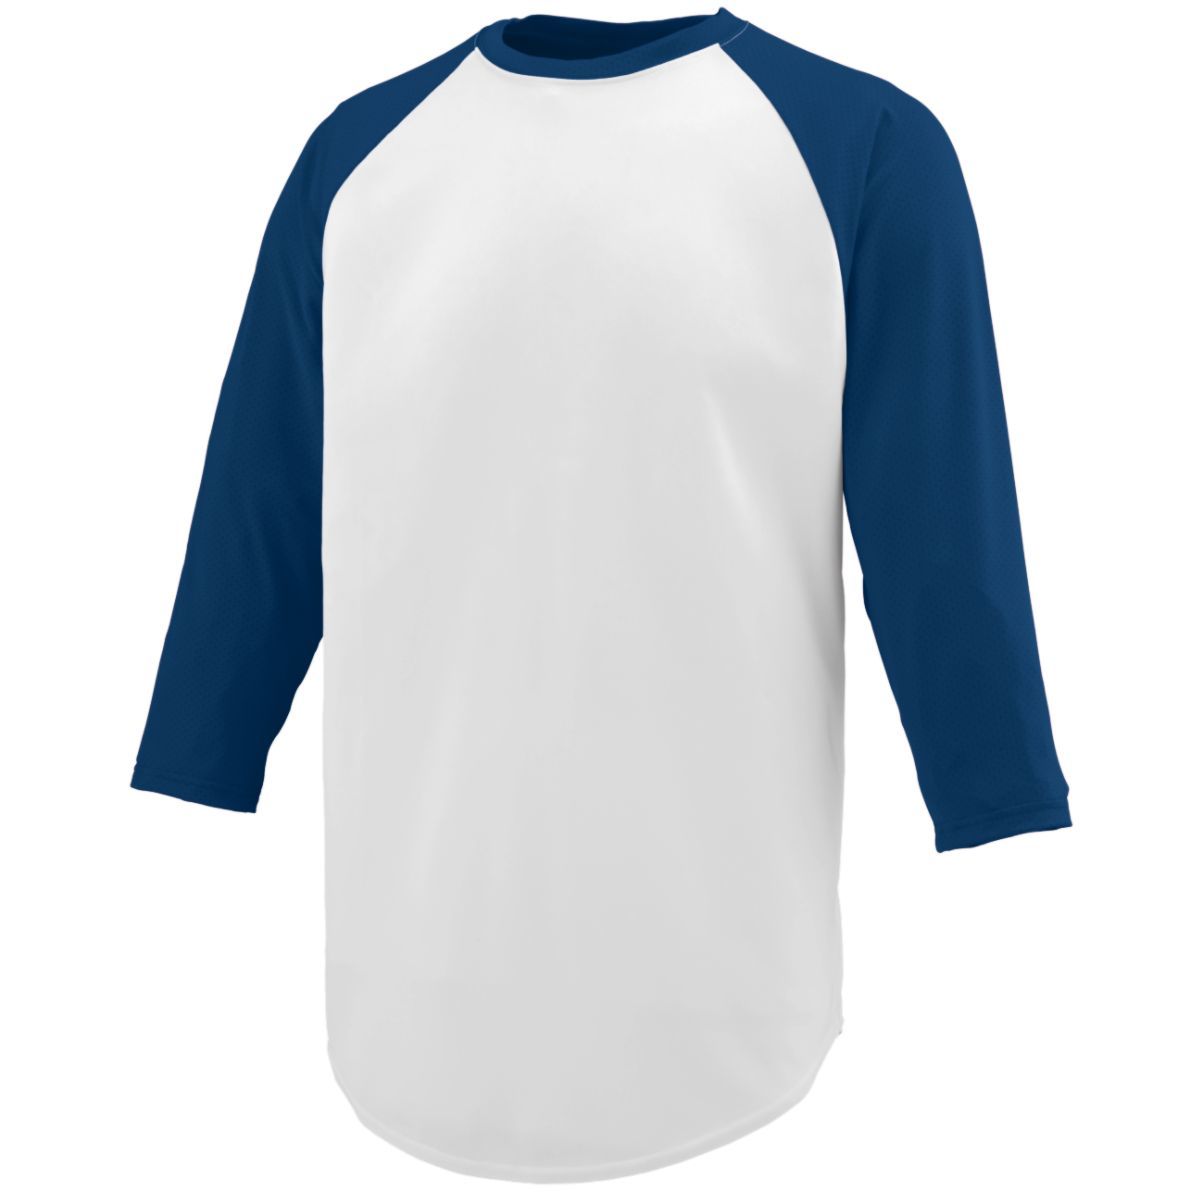 Augusta Sportswear Youth Nova Jersey in White/Navy  -Part of the Youth, Youth-Jersey, Augusta-Products, Baseball, Shirts, All-Sports, All-Sports-1 product lines at KanaleyCreations.com